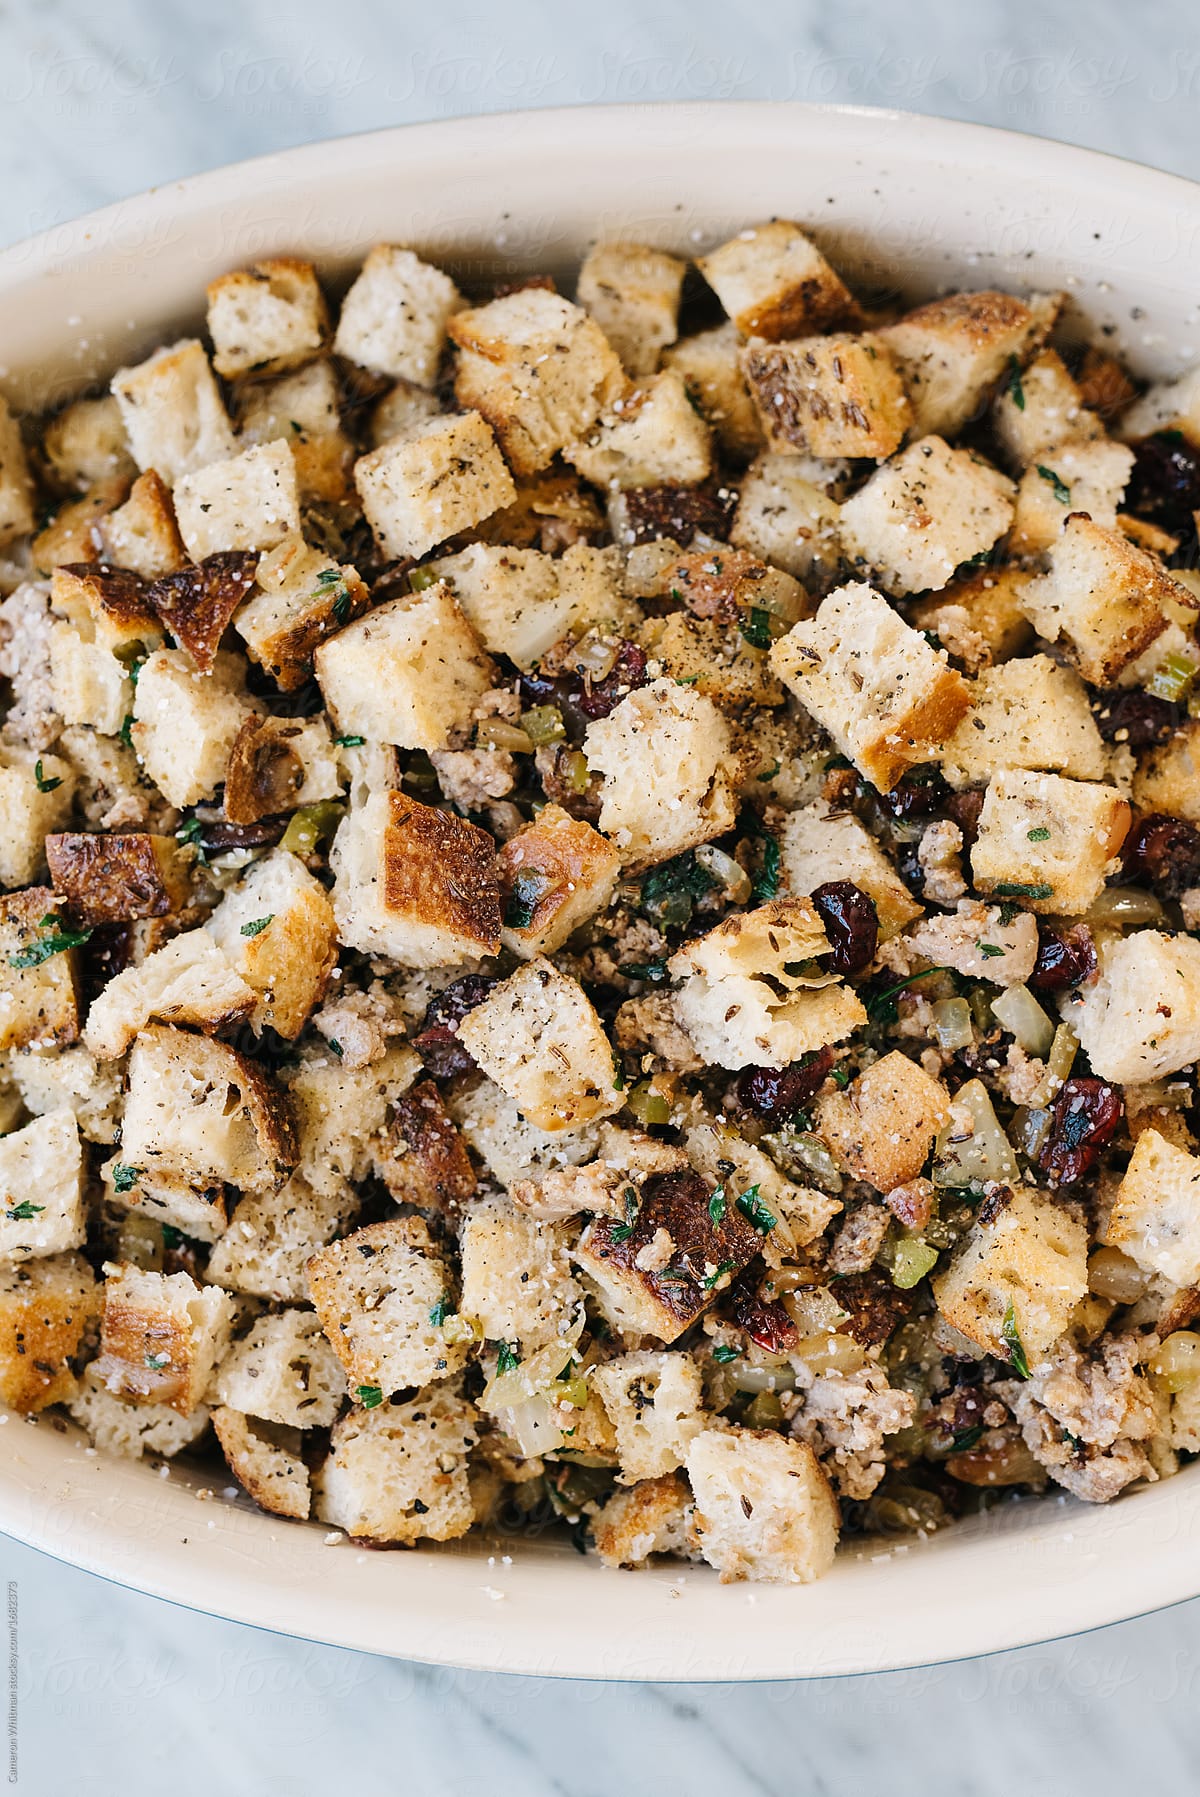 "Rye Bread Sausage Stuffing With Cranberry Preparation" by Stocksy ...